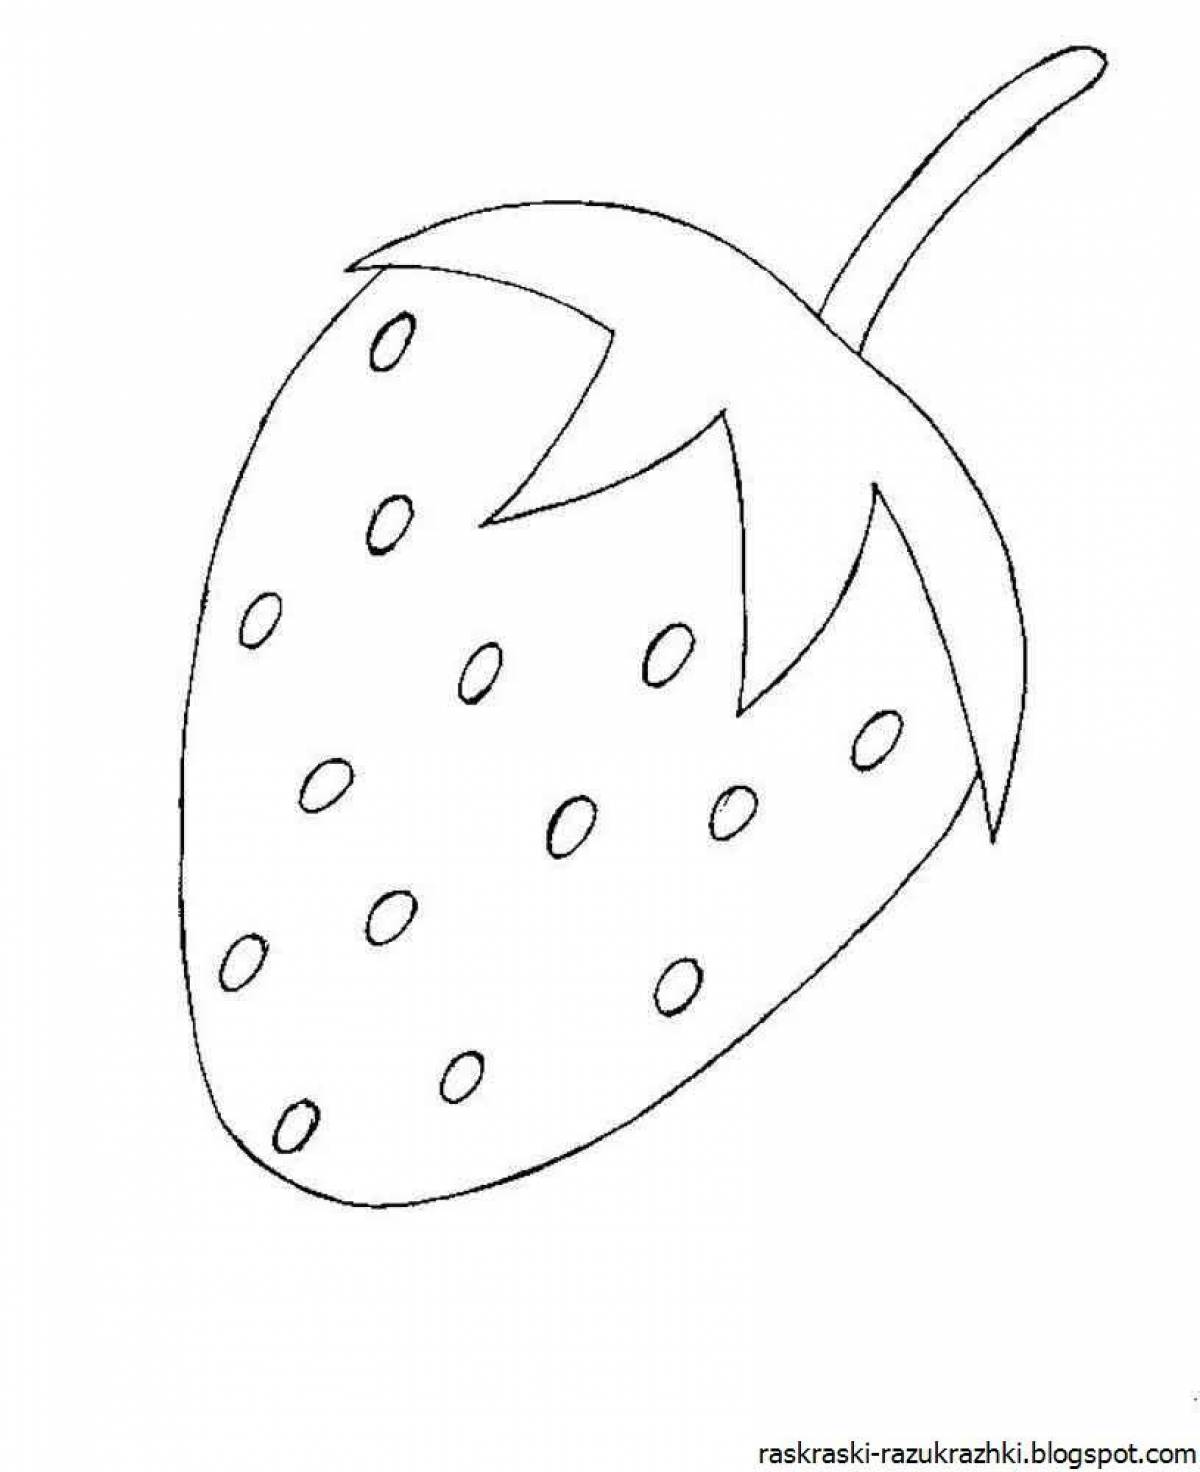 Fun fruit coloring pages